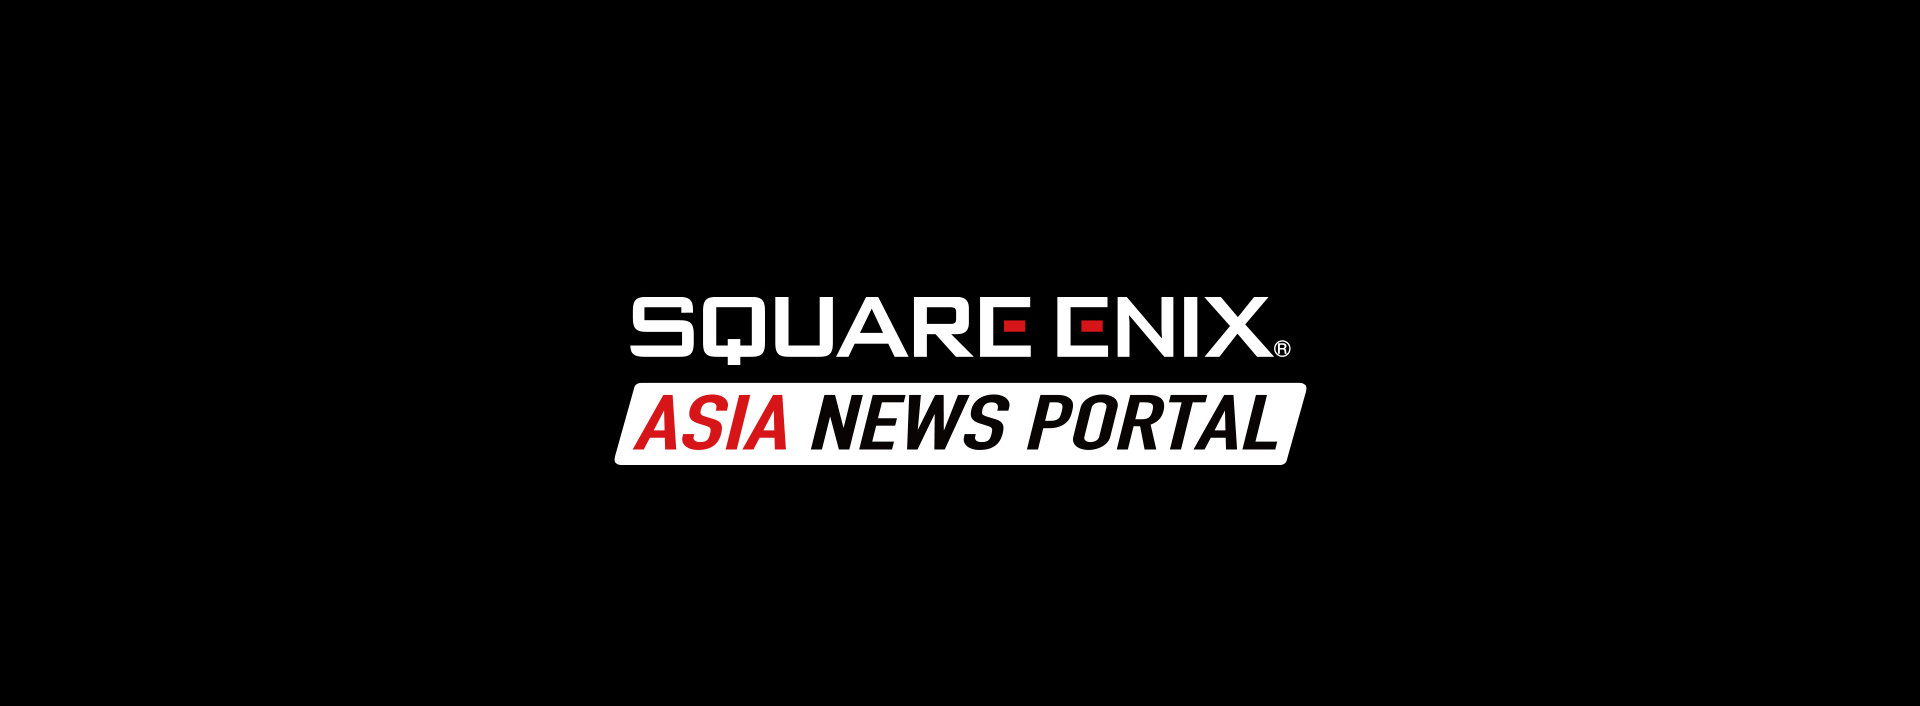 Announcement of opening of “SQUARE ENIX ASIA NEWS PORTAL”.